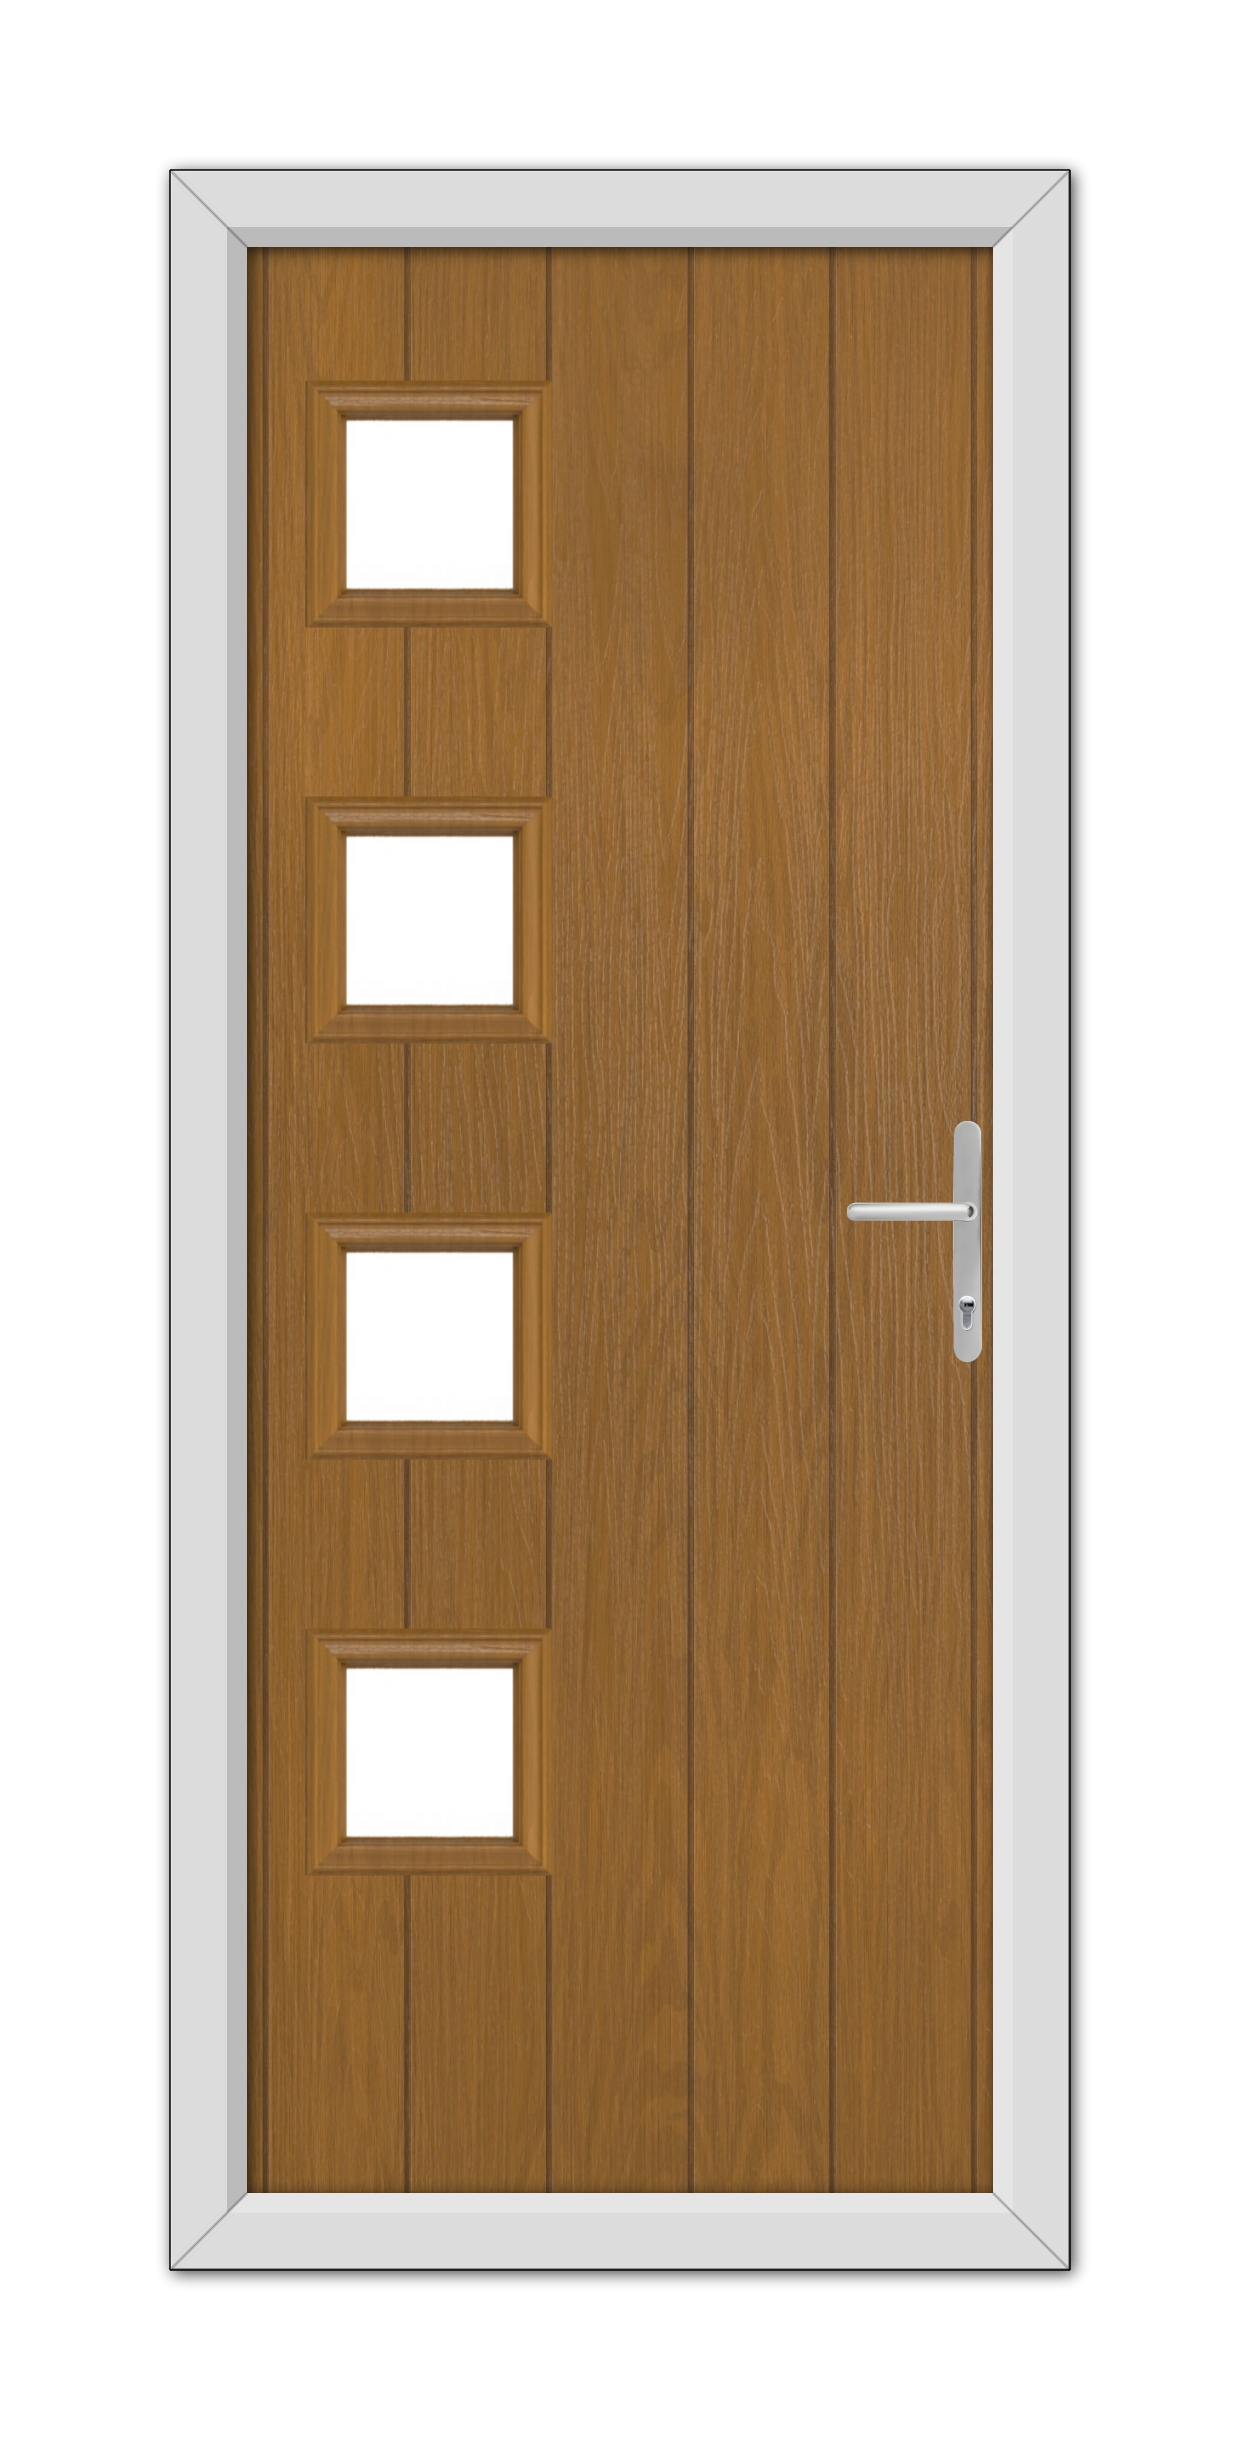 A modern Oak Sussex Composite Door 48mm Timber Core with a white frame, featuring a horizontal line of five rectangular glass panels on the left side and a metallic handle.